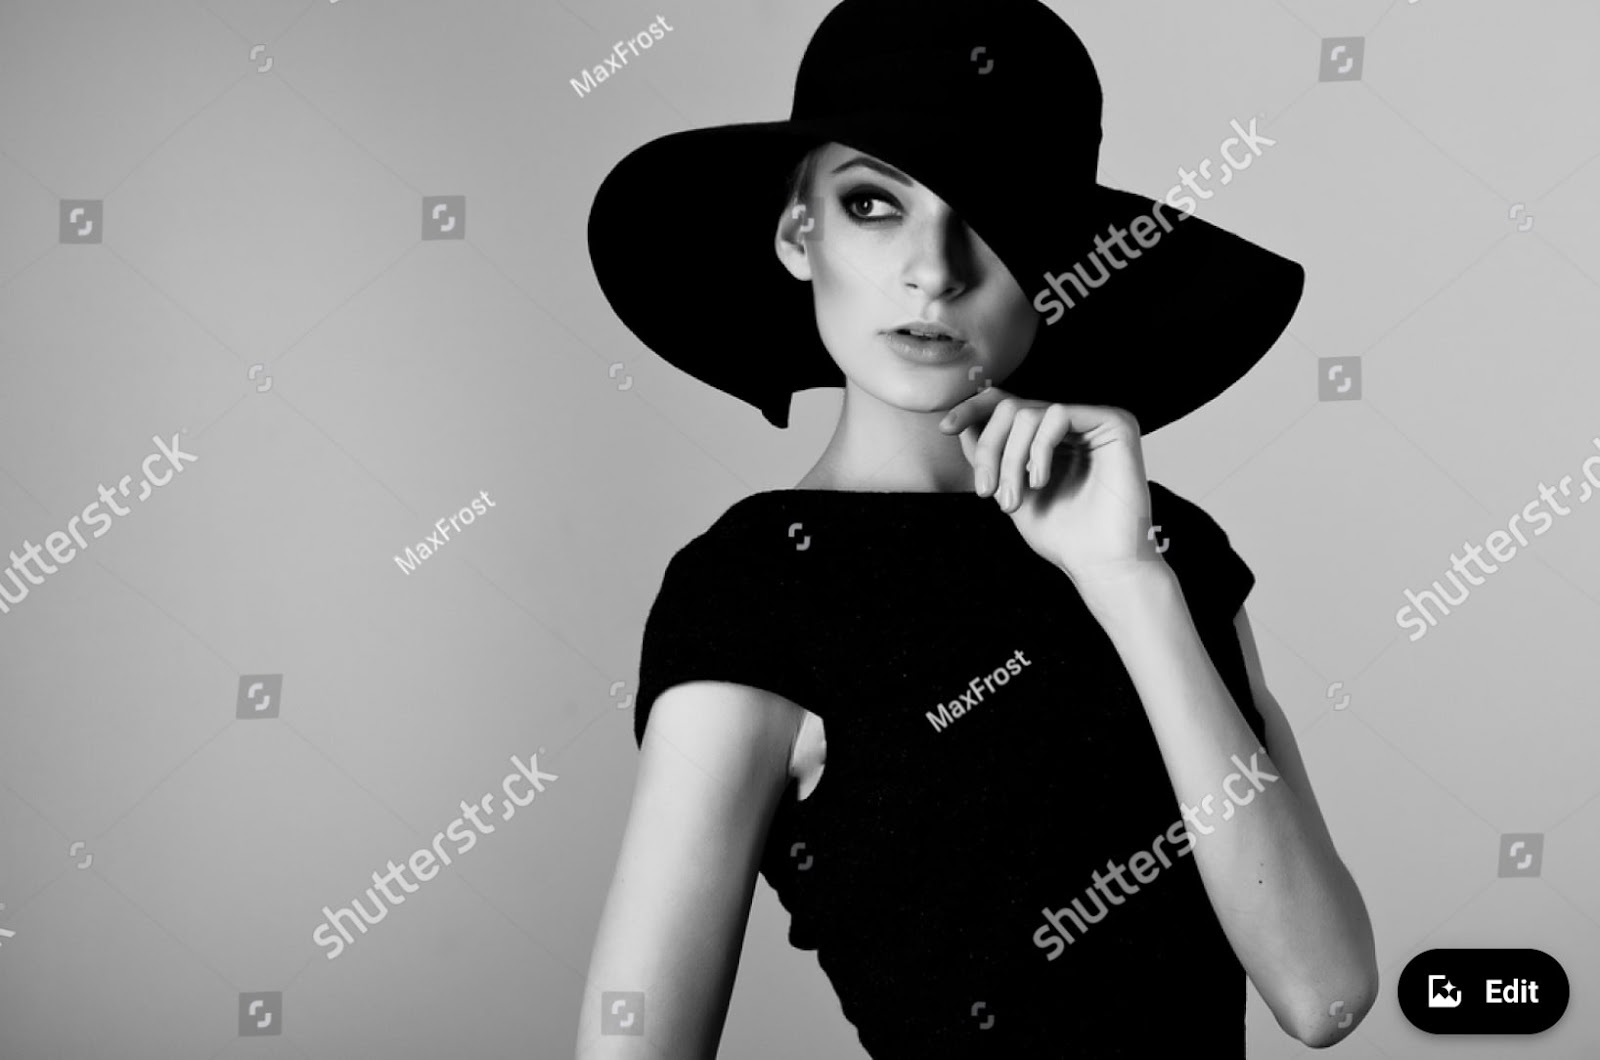 “high-fashion portrait of an elegant woman in a black and white hat and dress. Studio shot” image from Shutterstock